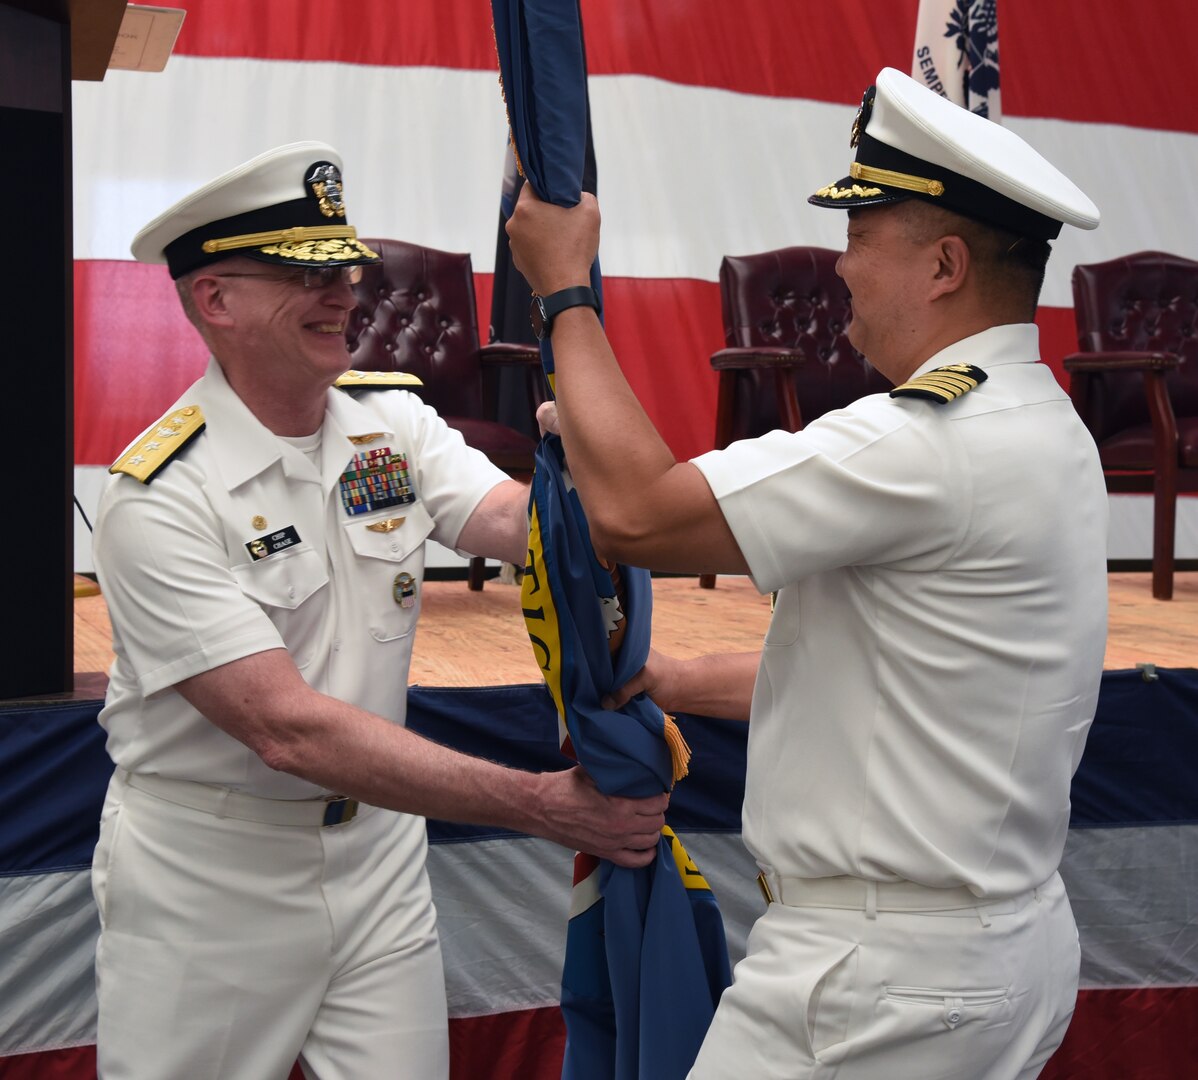 Photo is of two men in Navy white uniforms holding a large flag between them.